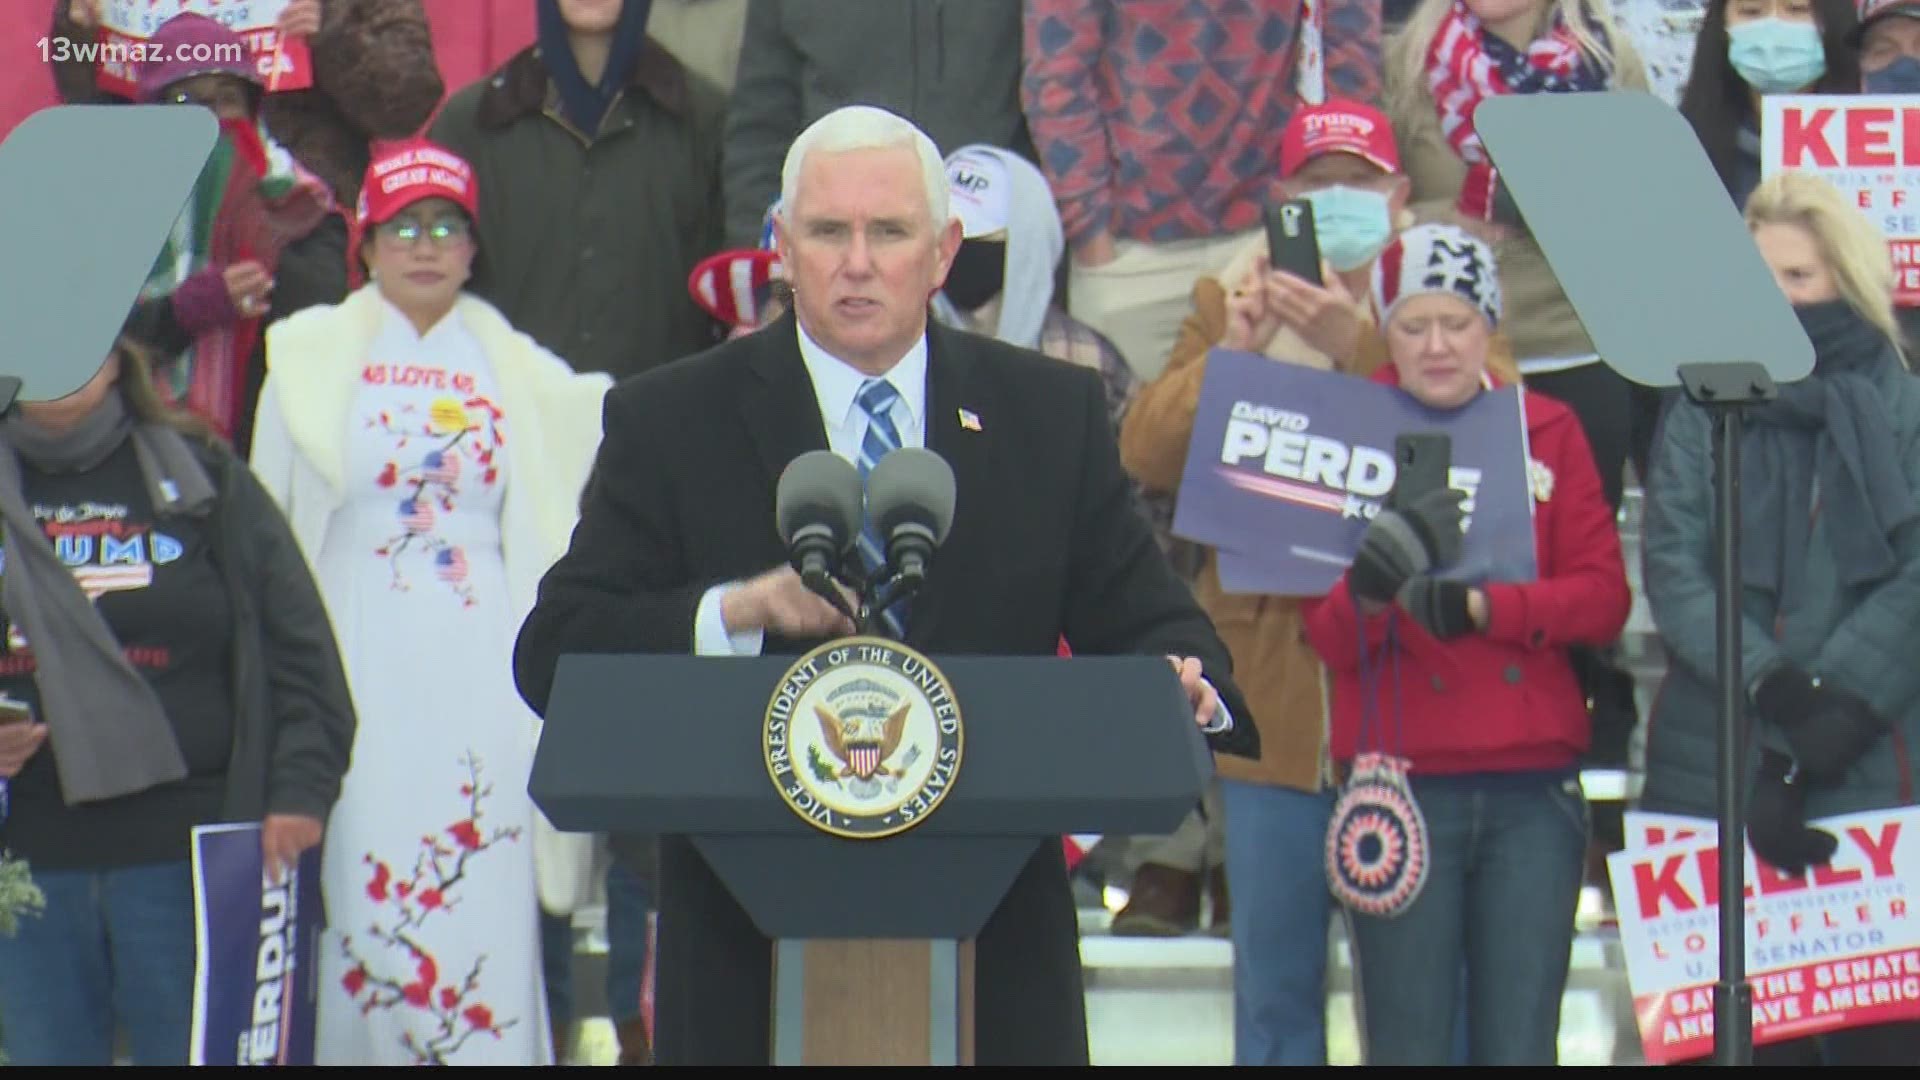 VP Mike Pence stopped by the Middle Georgia Regional Airport Thursday for a Defend the Majority rally in support of Sens. David Perdue and Kelly Loeffler